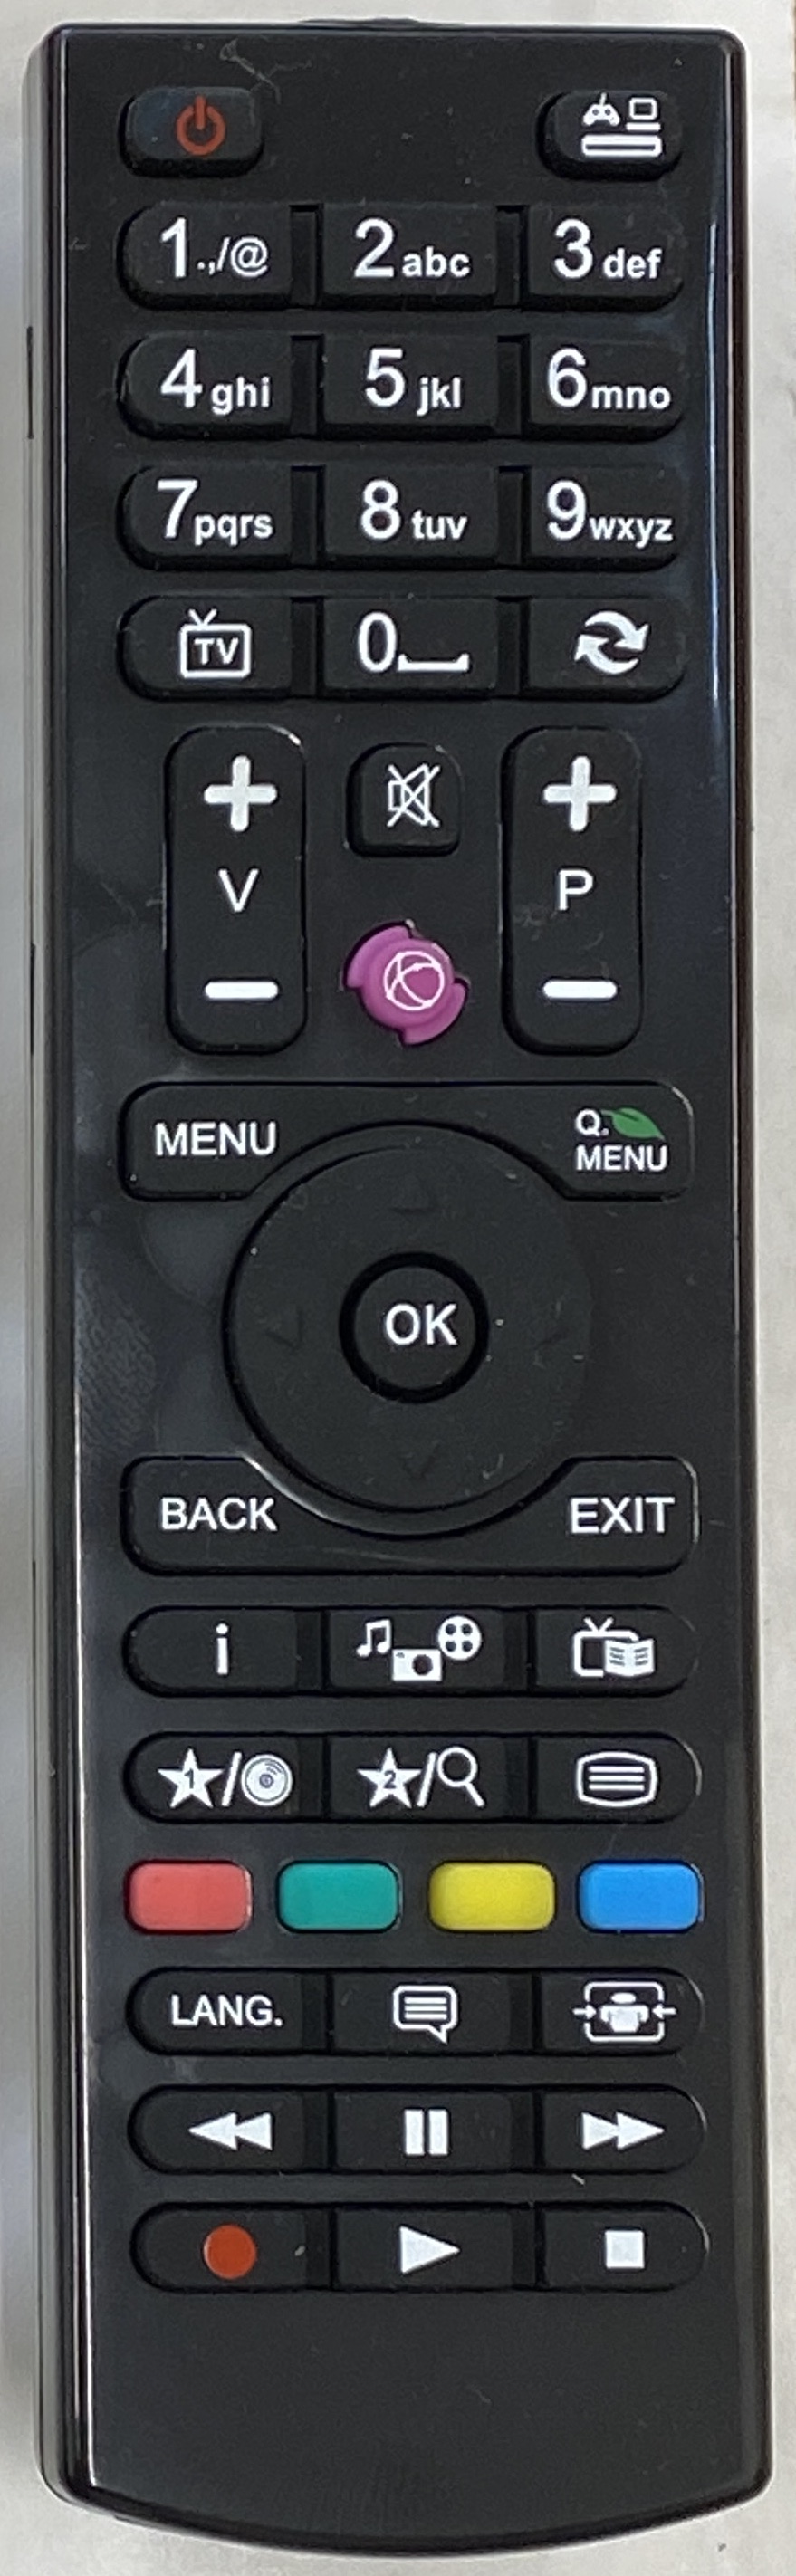 DIGIHOME 43287FHDDLED Remote Control Original  